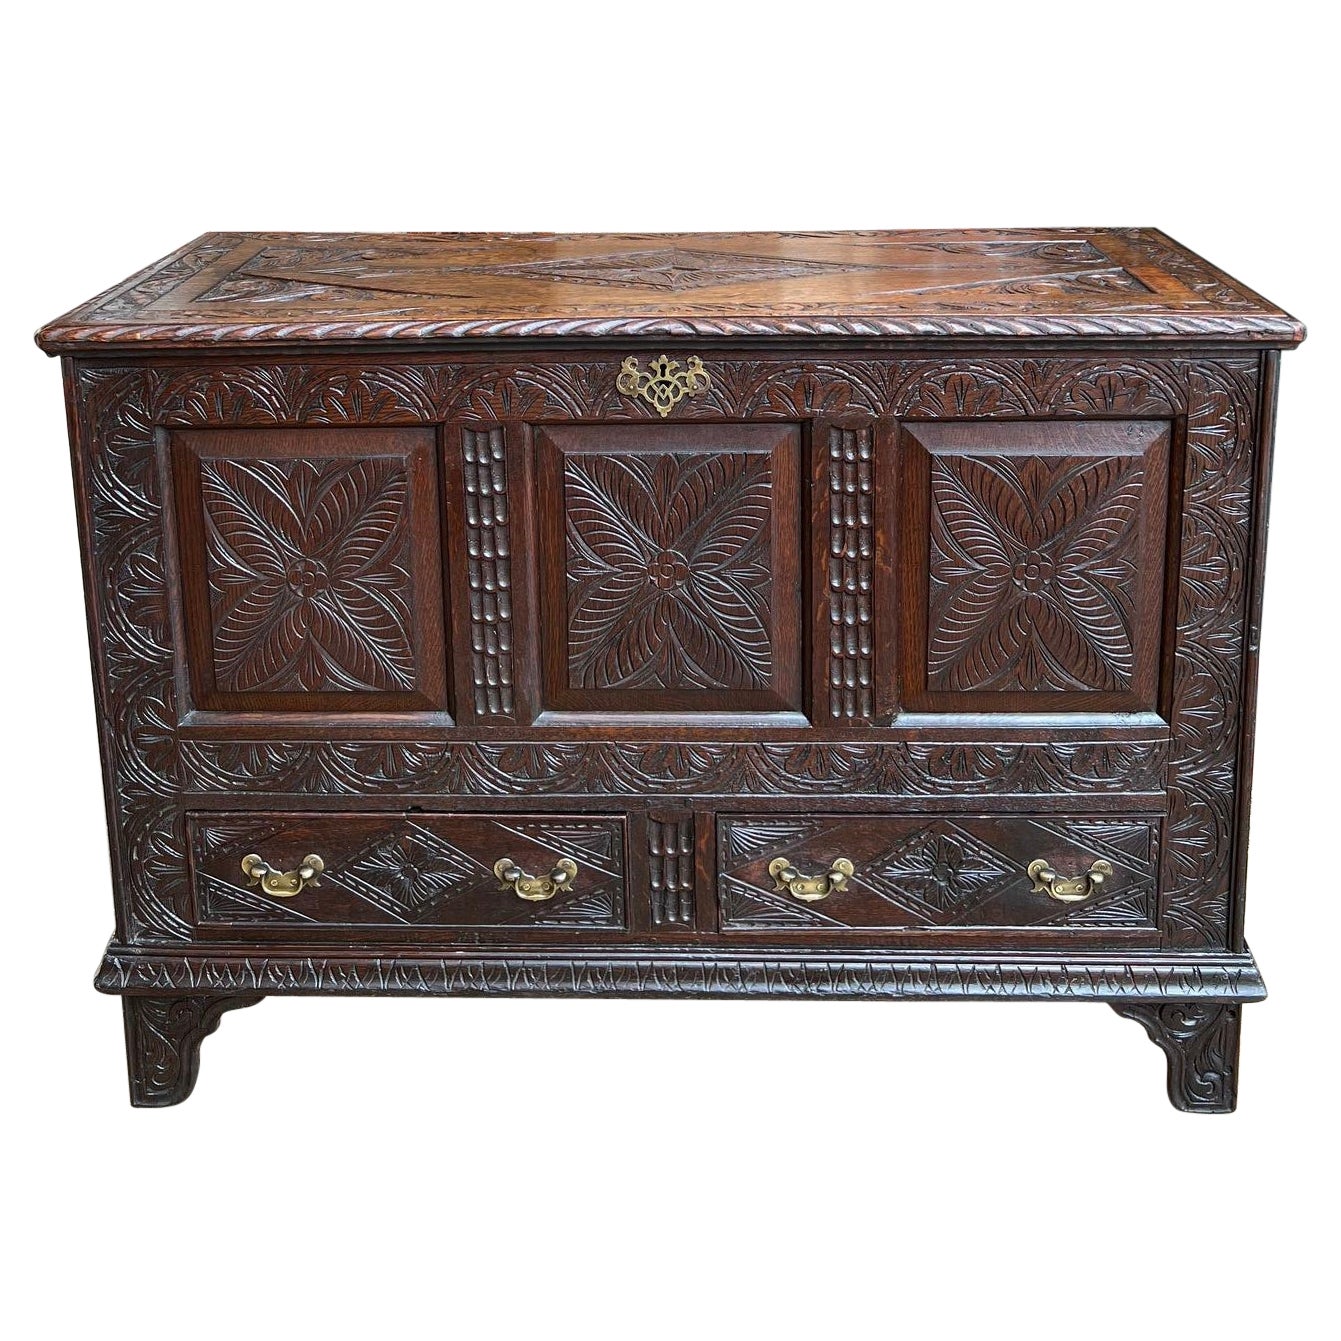 19th century Antique English Trunk Coffer Blanket Chest Carved Oak Foyer Table